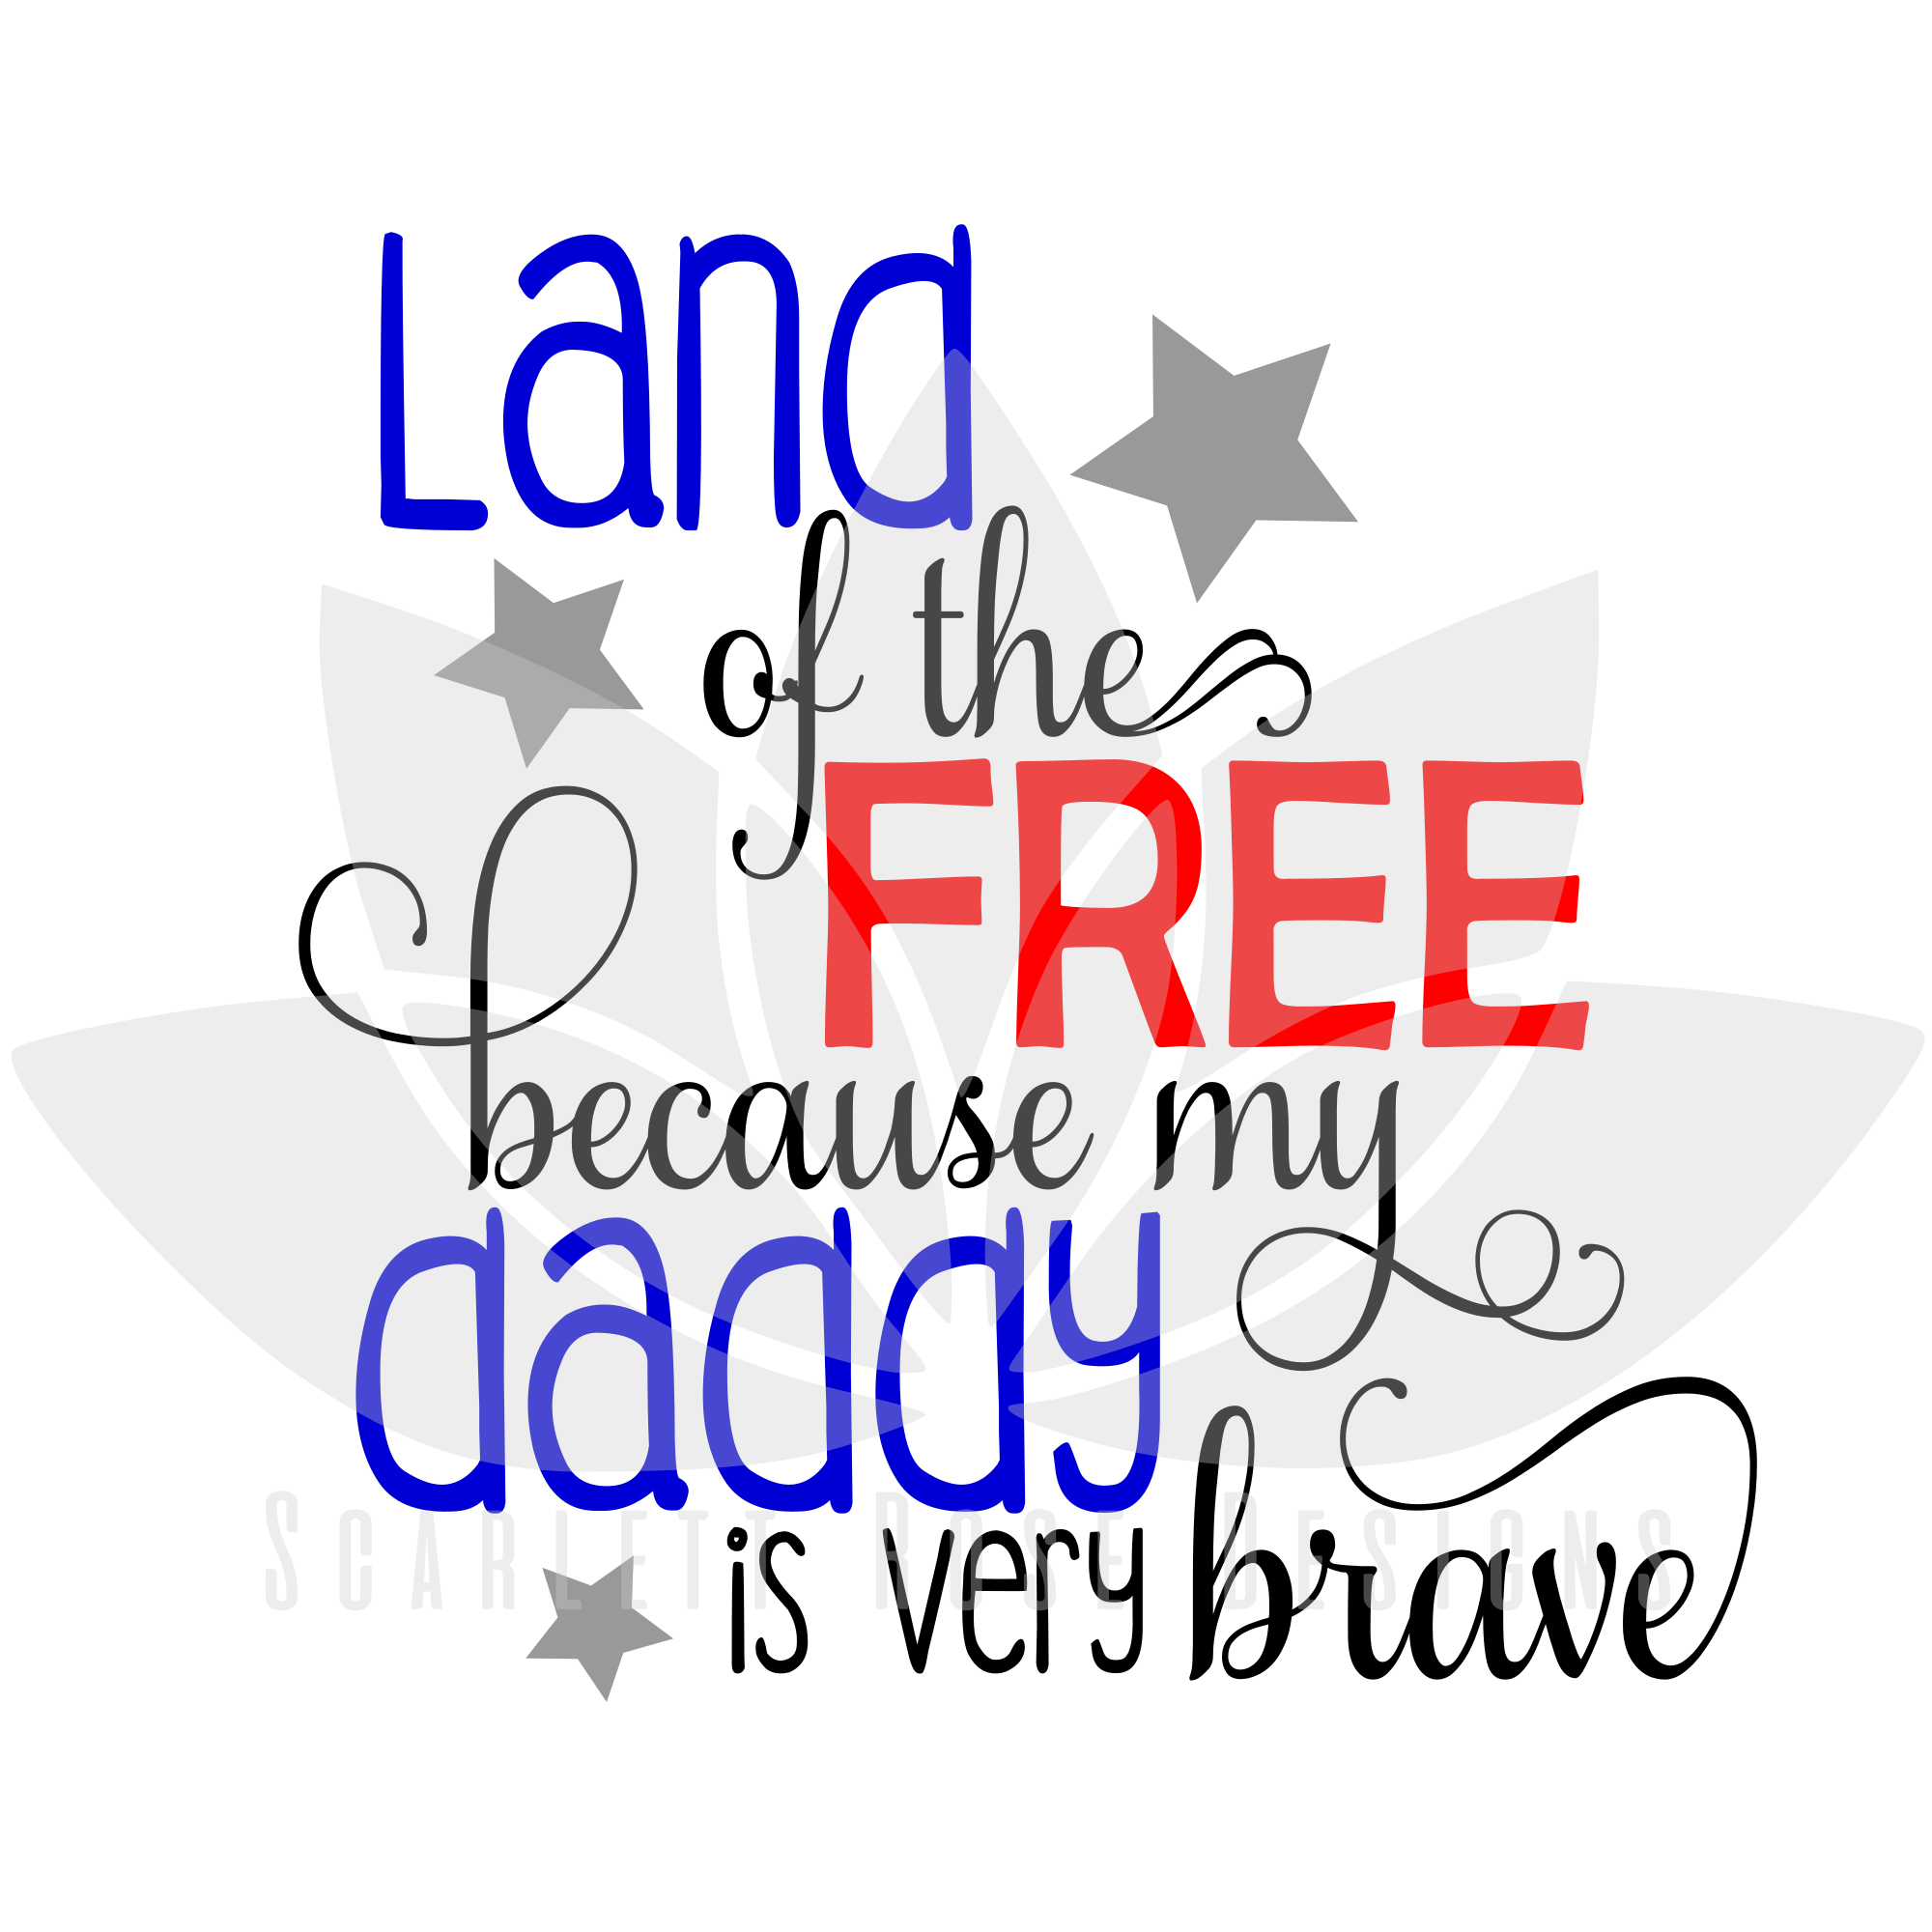 land of the free because of the brave svg file